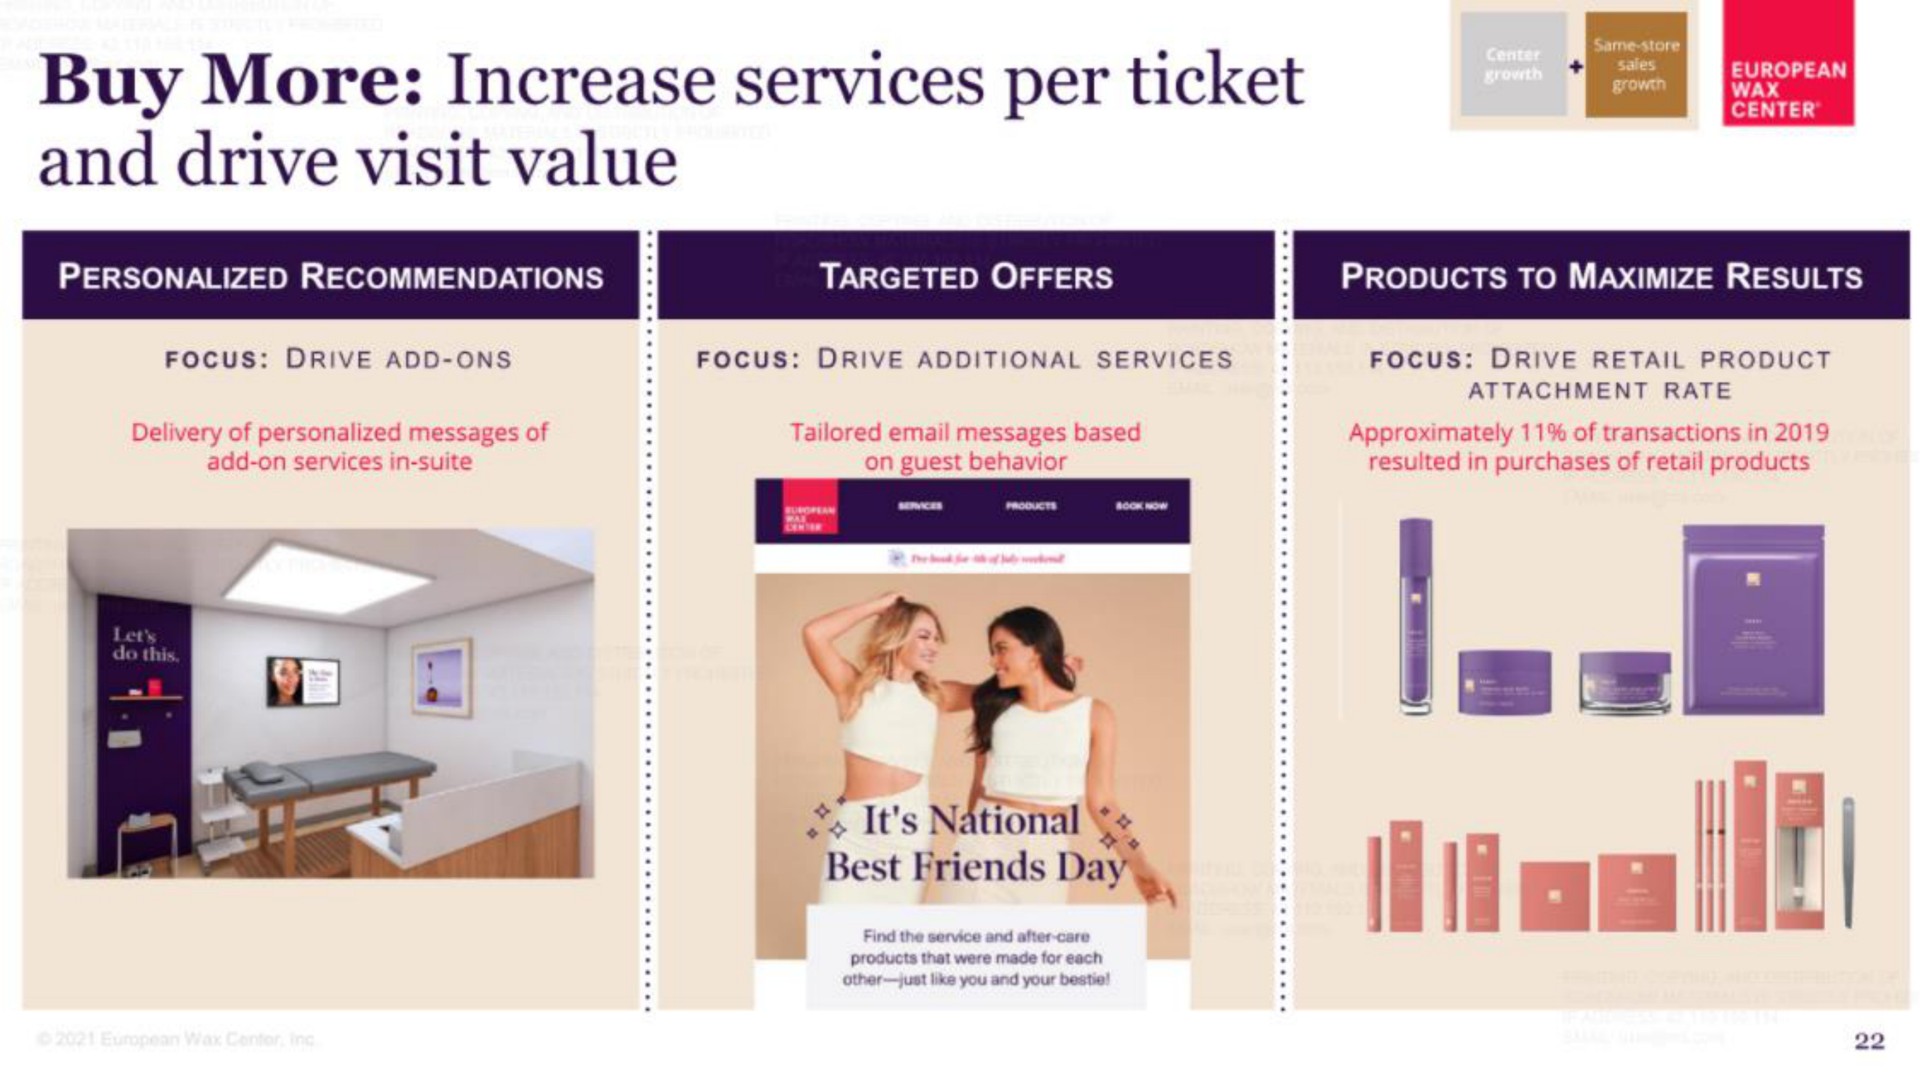 buy more increase services per ticket and drive visit value a tit | European Wax Center